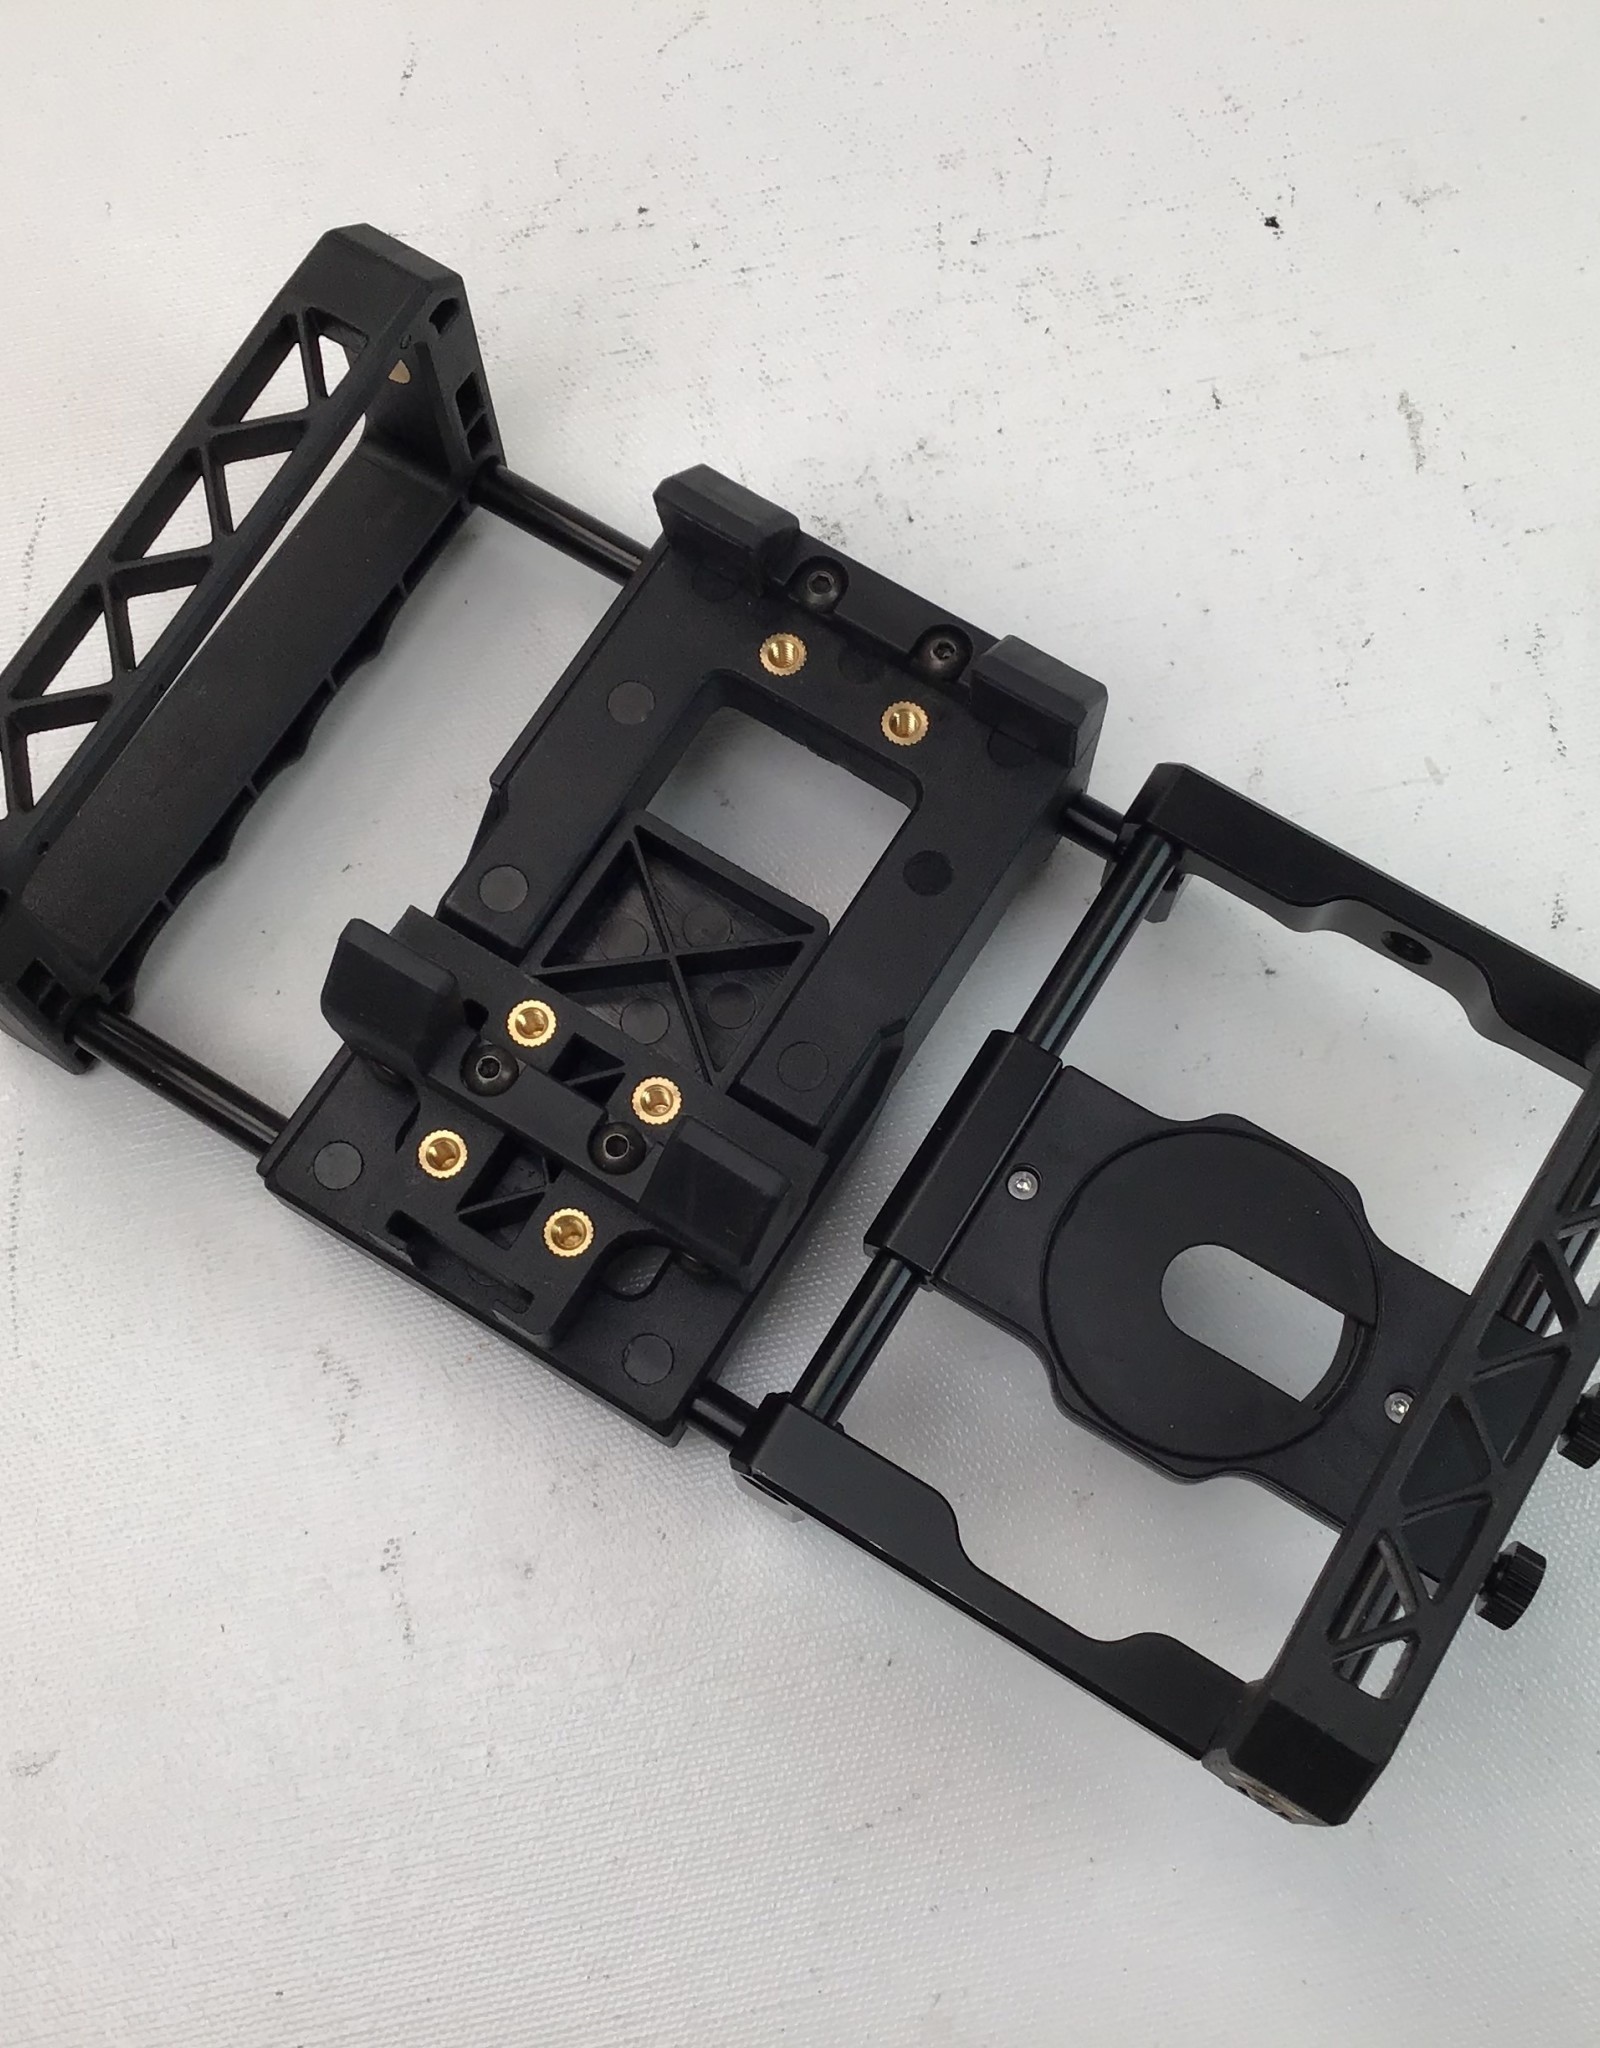 BeastGrip Mobile Cage for Phones Used EX